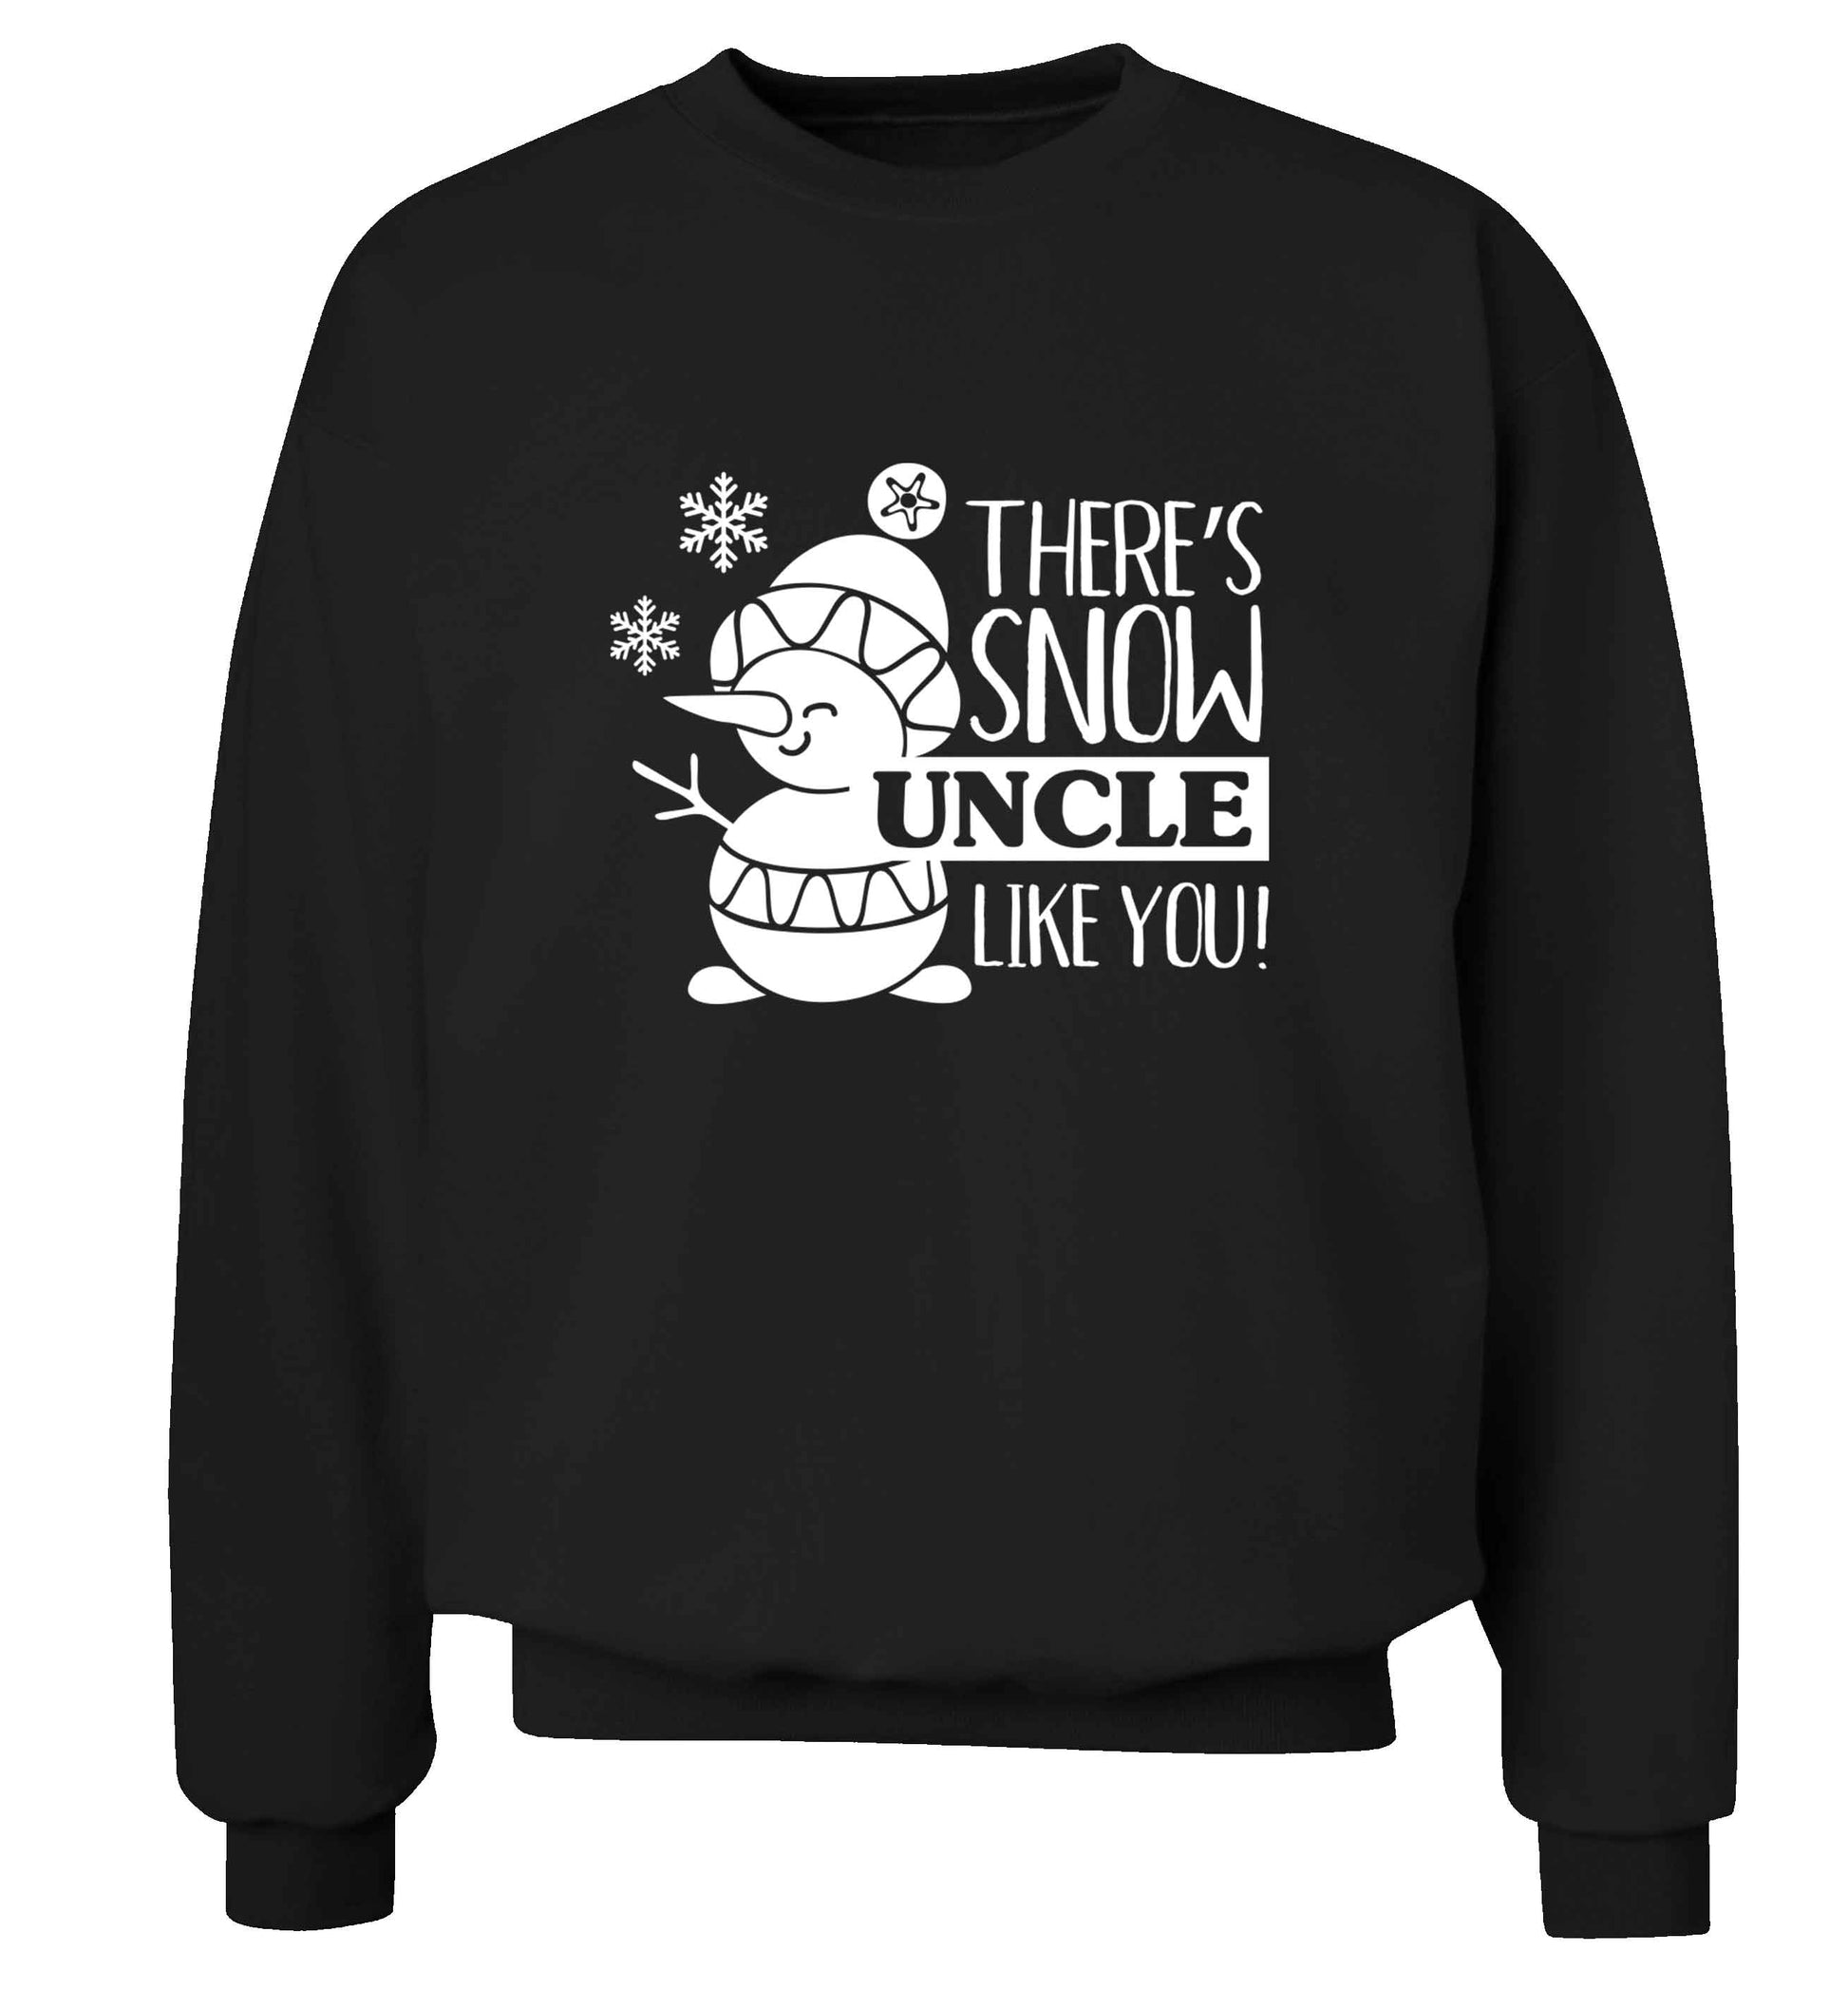 There's snow uncle like you adult's unisex black sweater 2XL